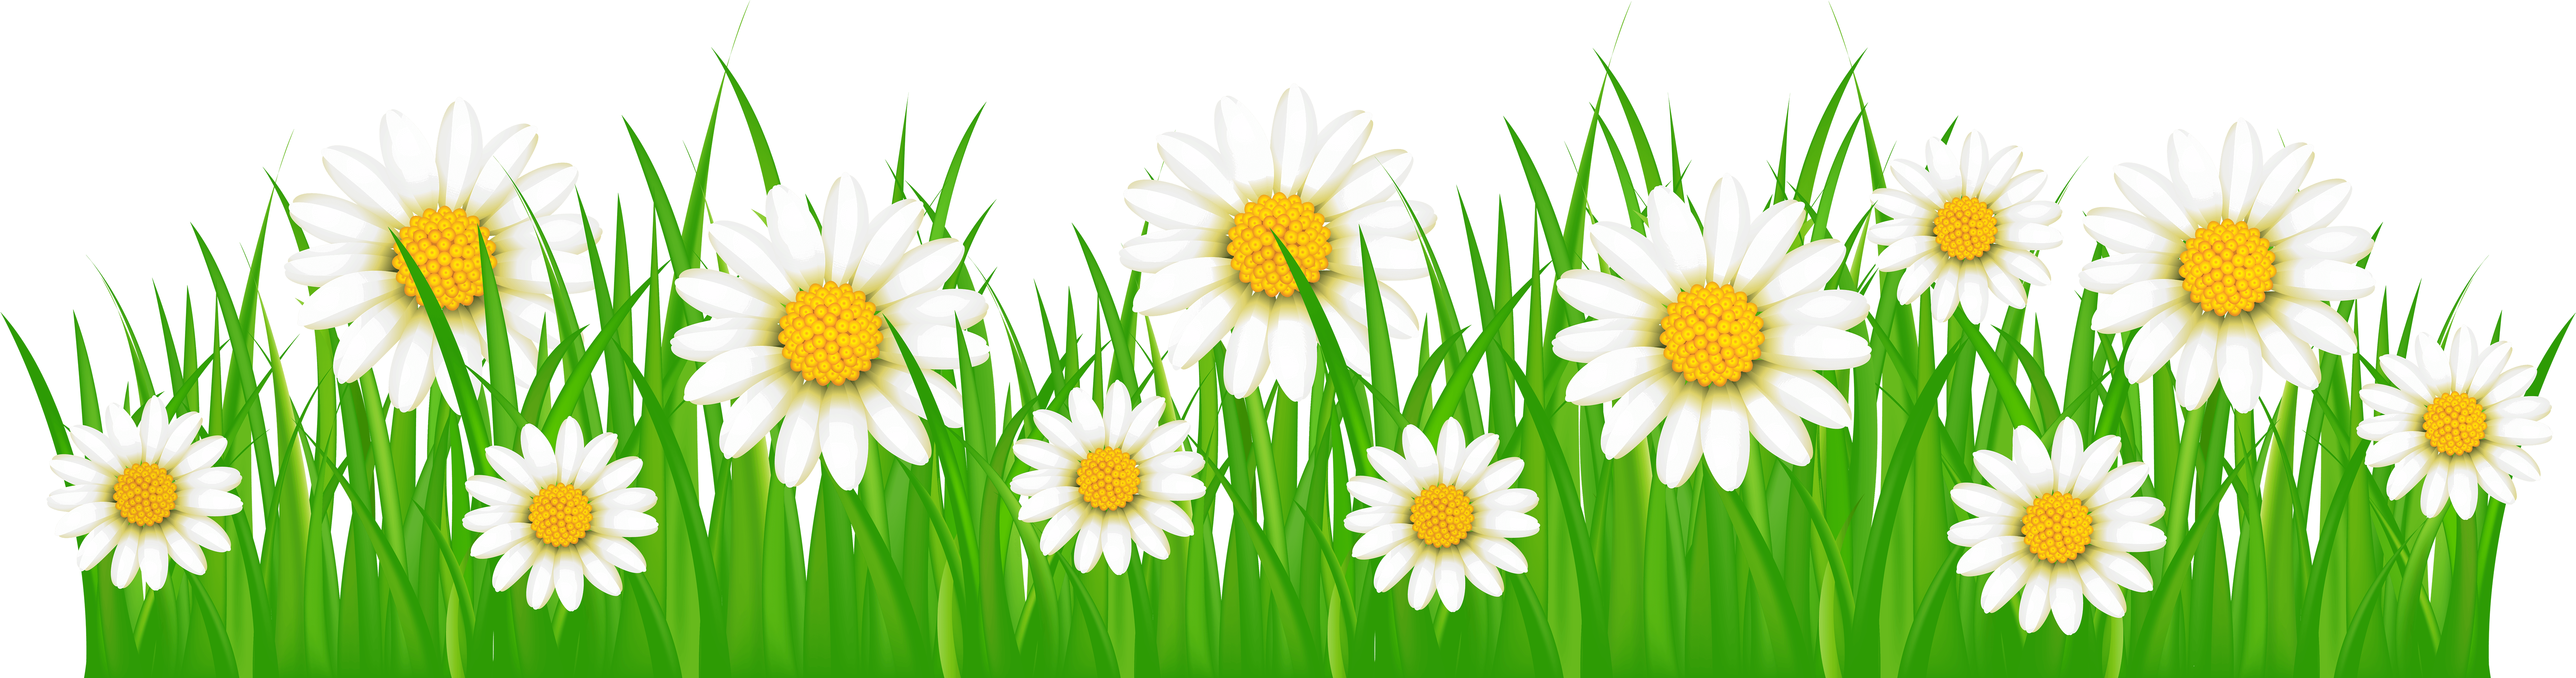 Daisiesin Grass Vector PNG image